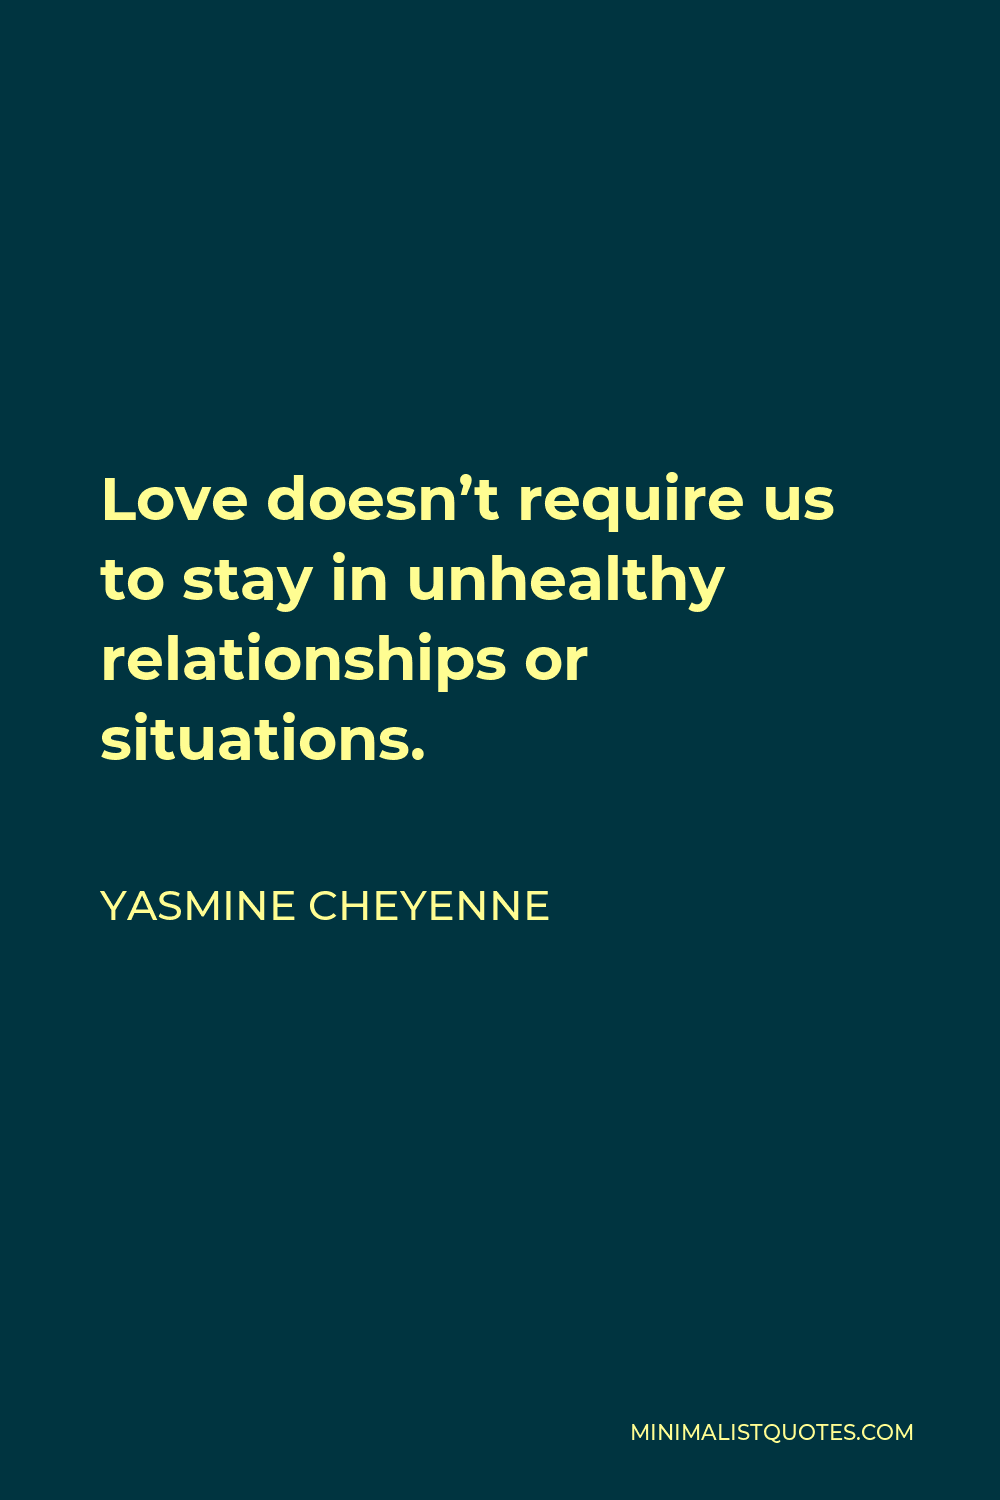 Yasmine Cheyenne Quote - Love doesn’t require us to stay in unhealthy relationships or situations.